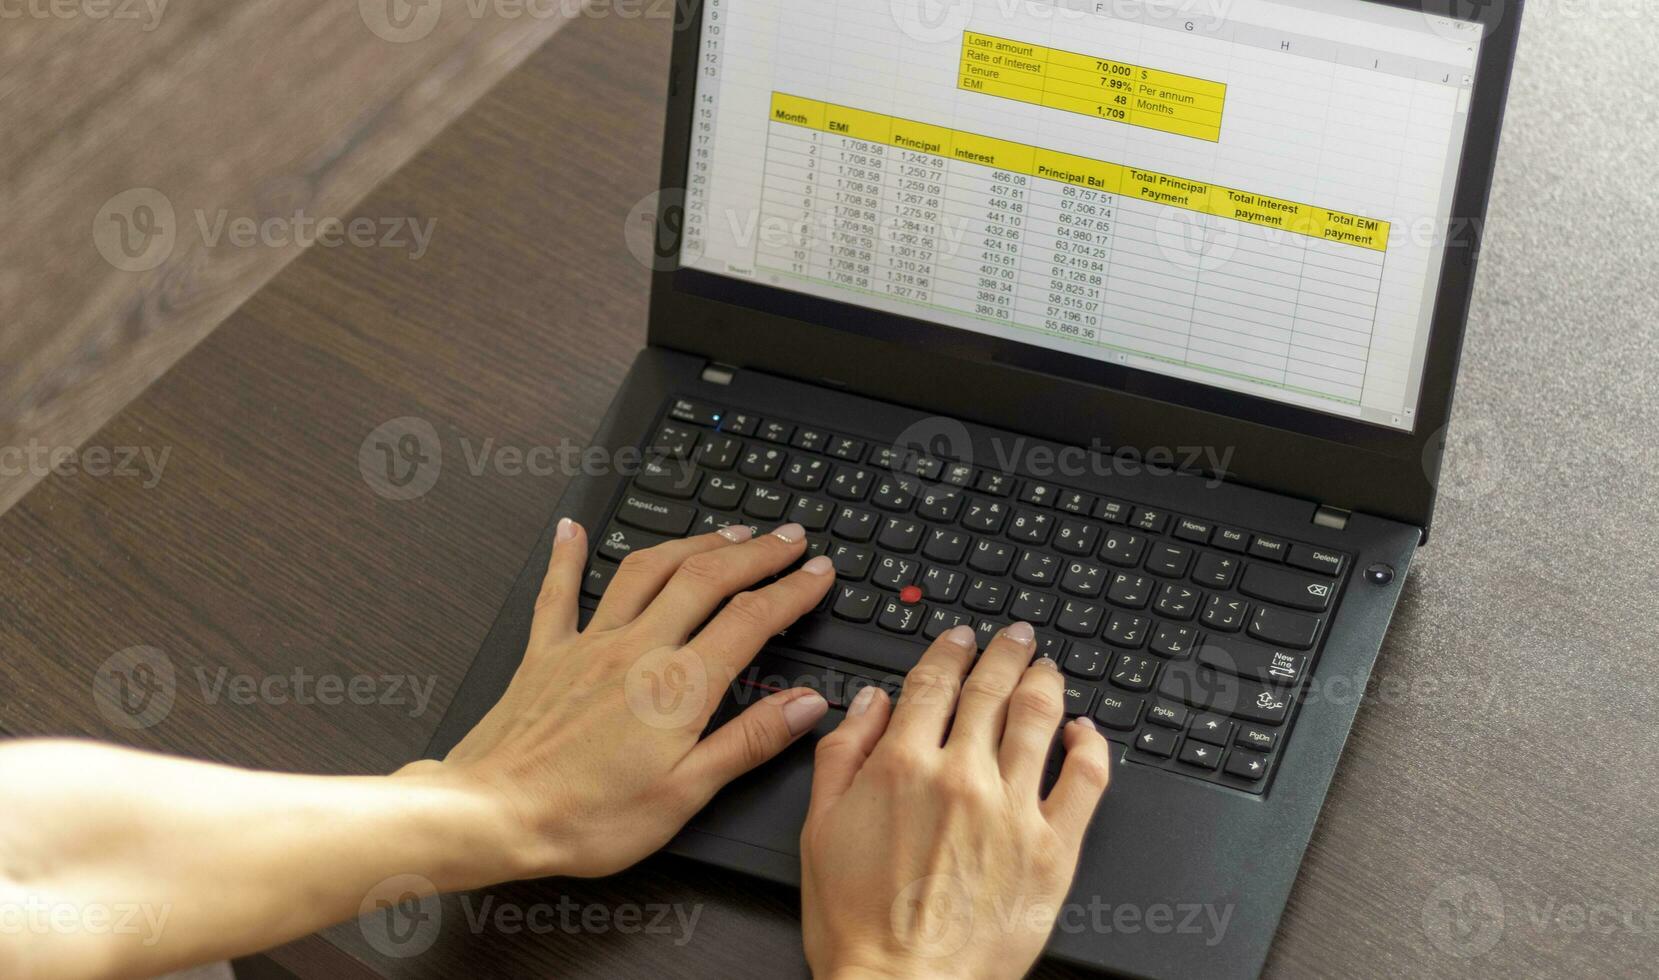 Shot of a woman working on the laptop showing an excel sheet on the screen with bank loan amortization table. Accounting photo